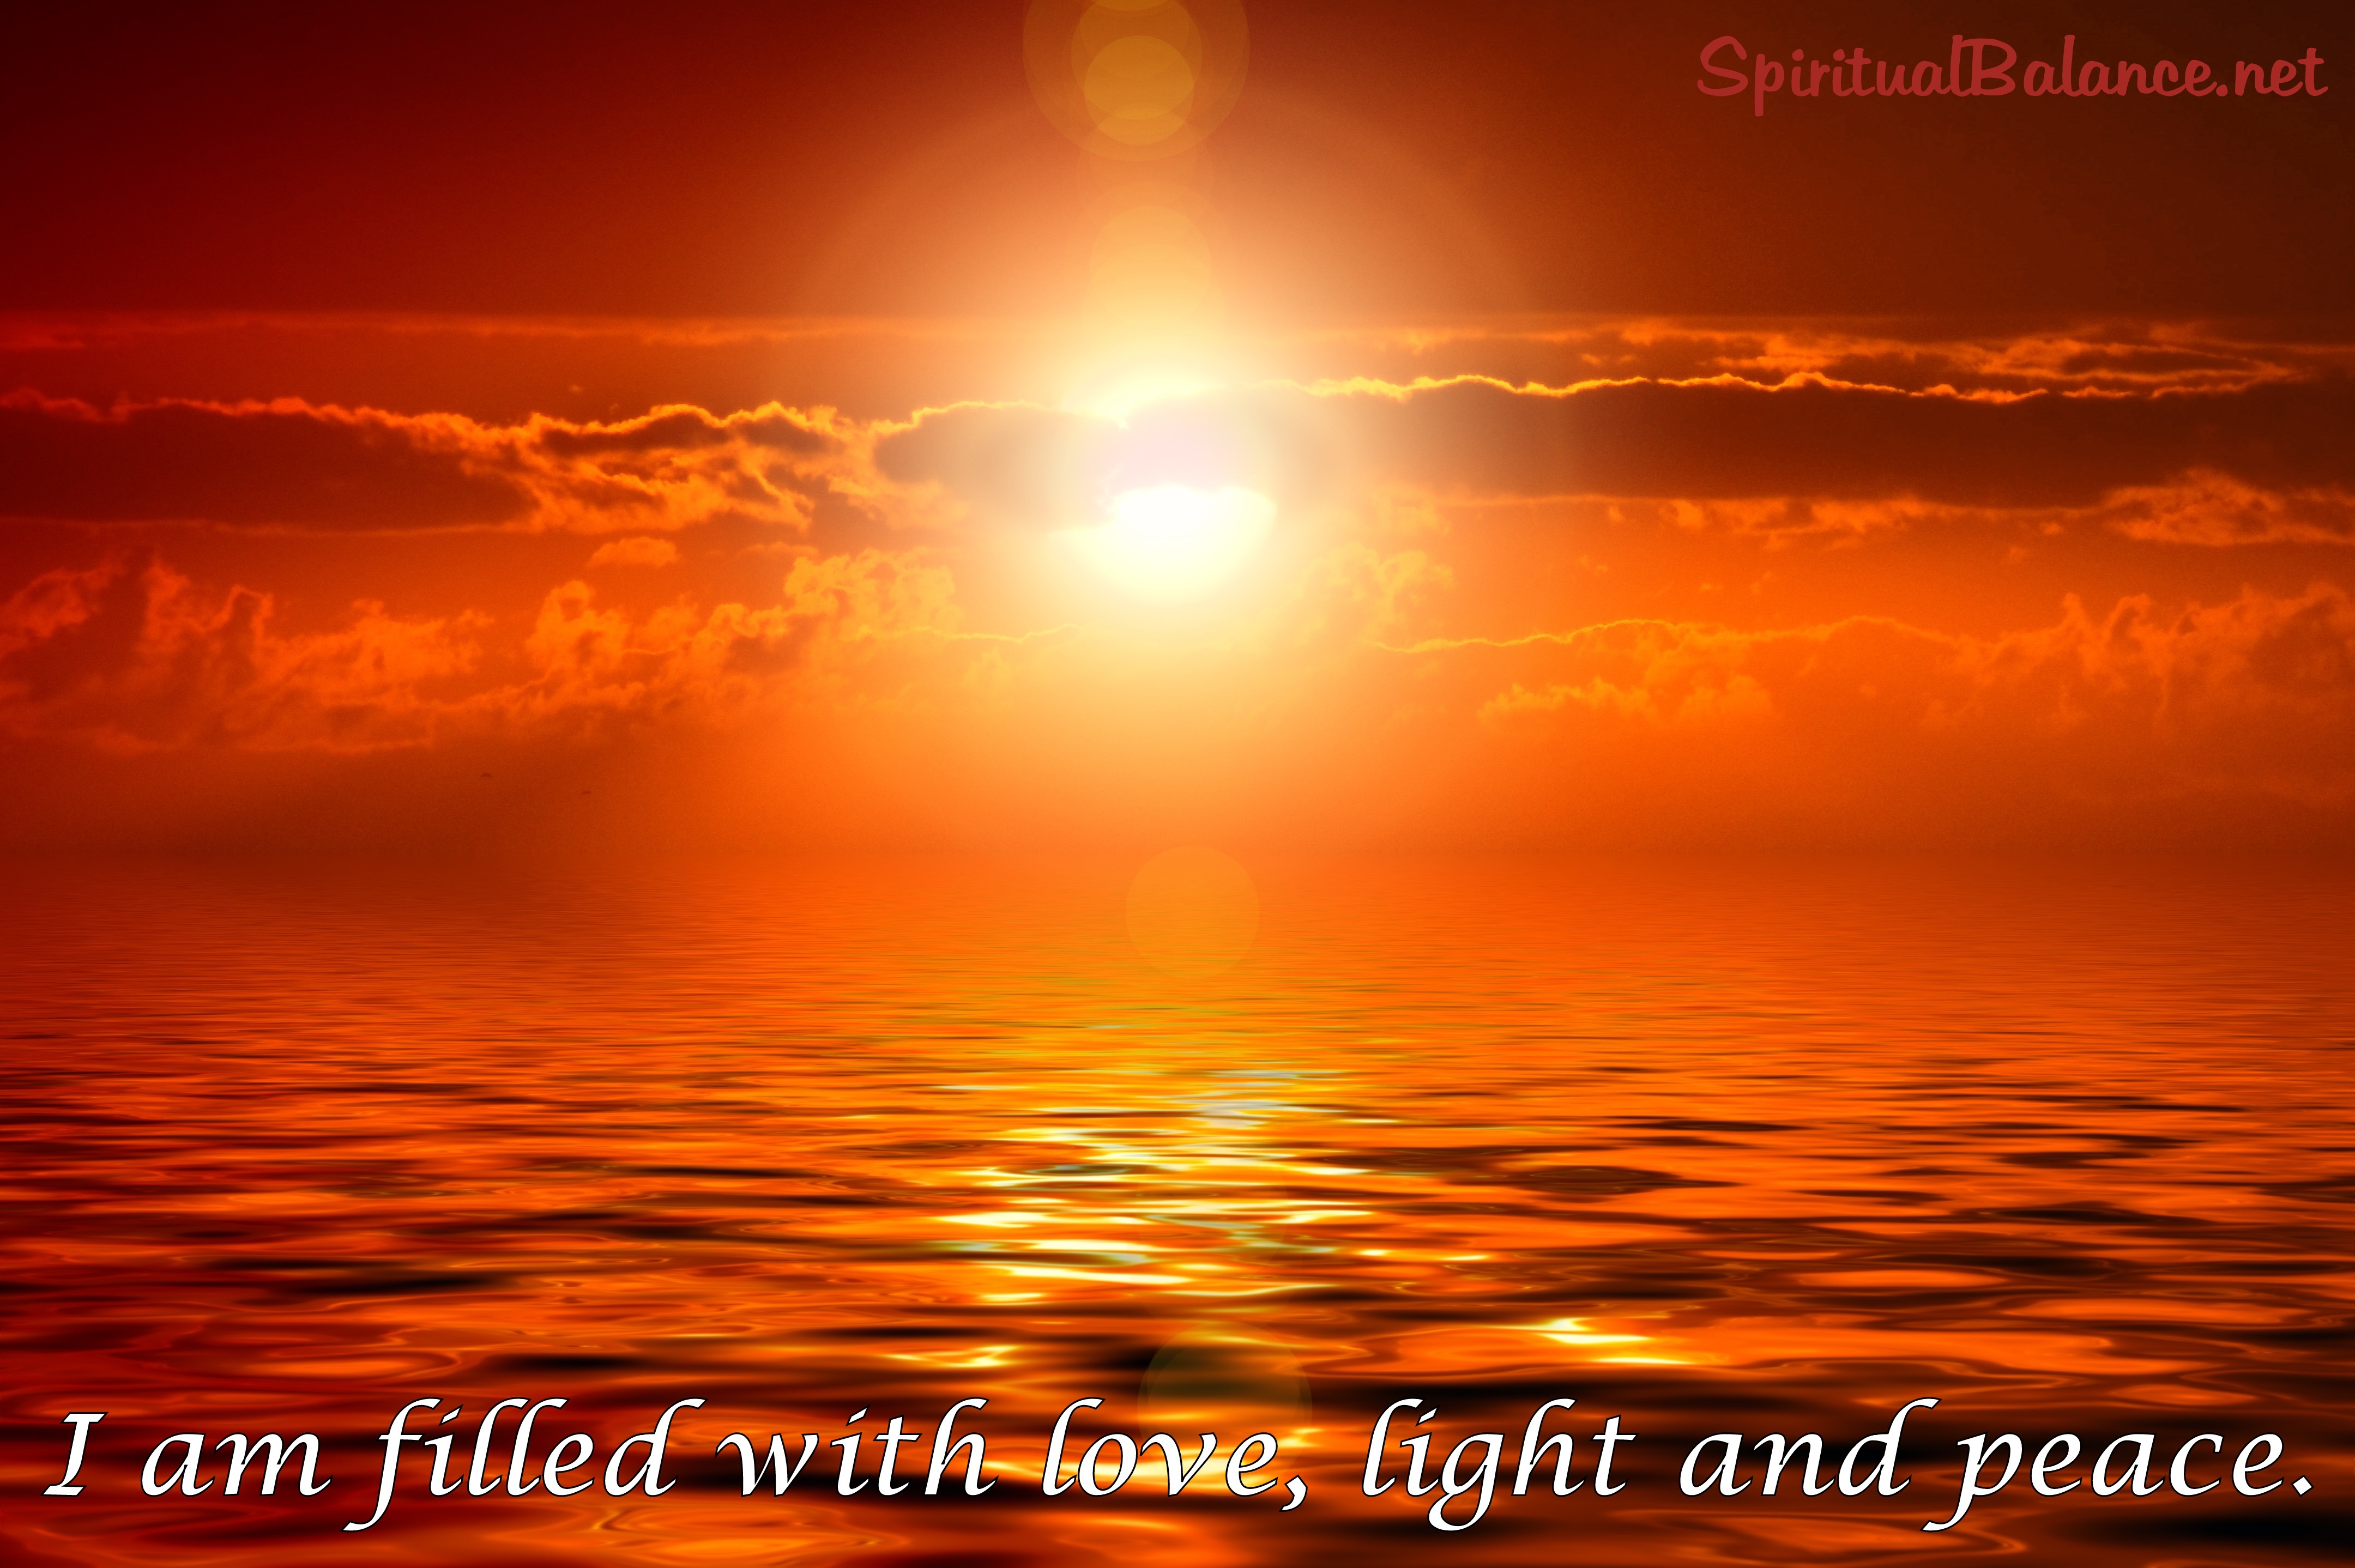 I am filled with love, light and peace.